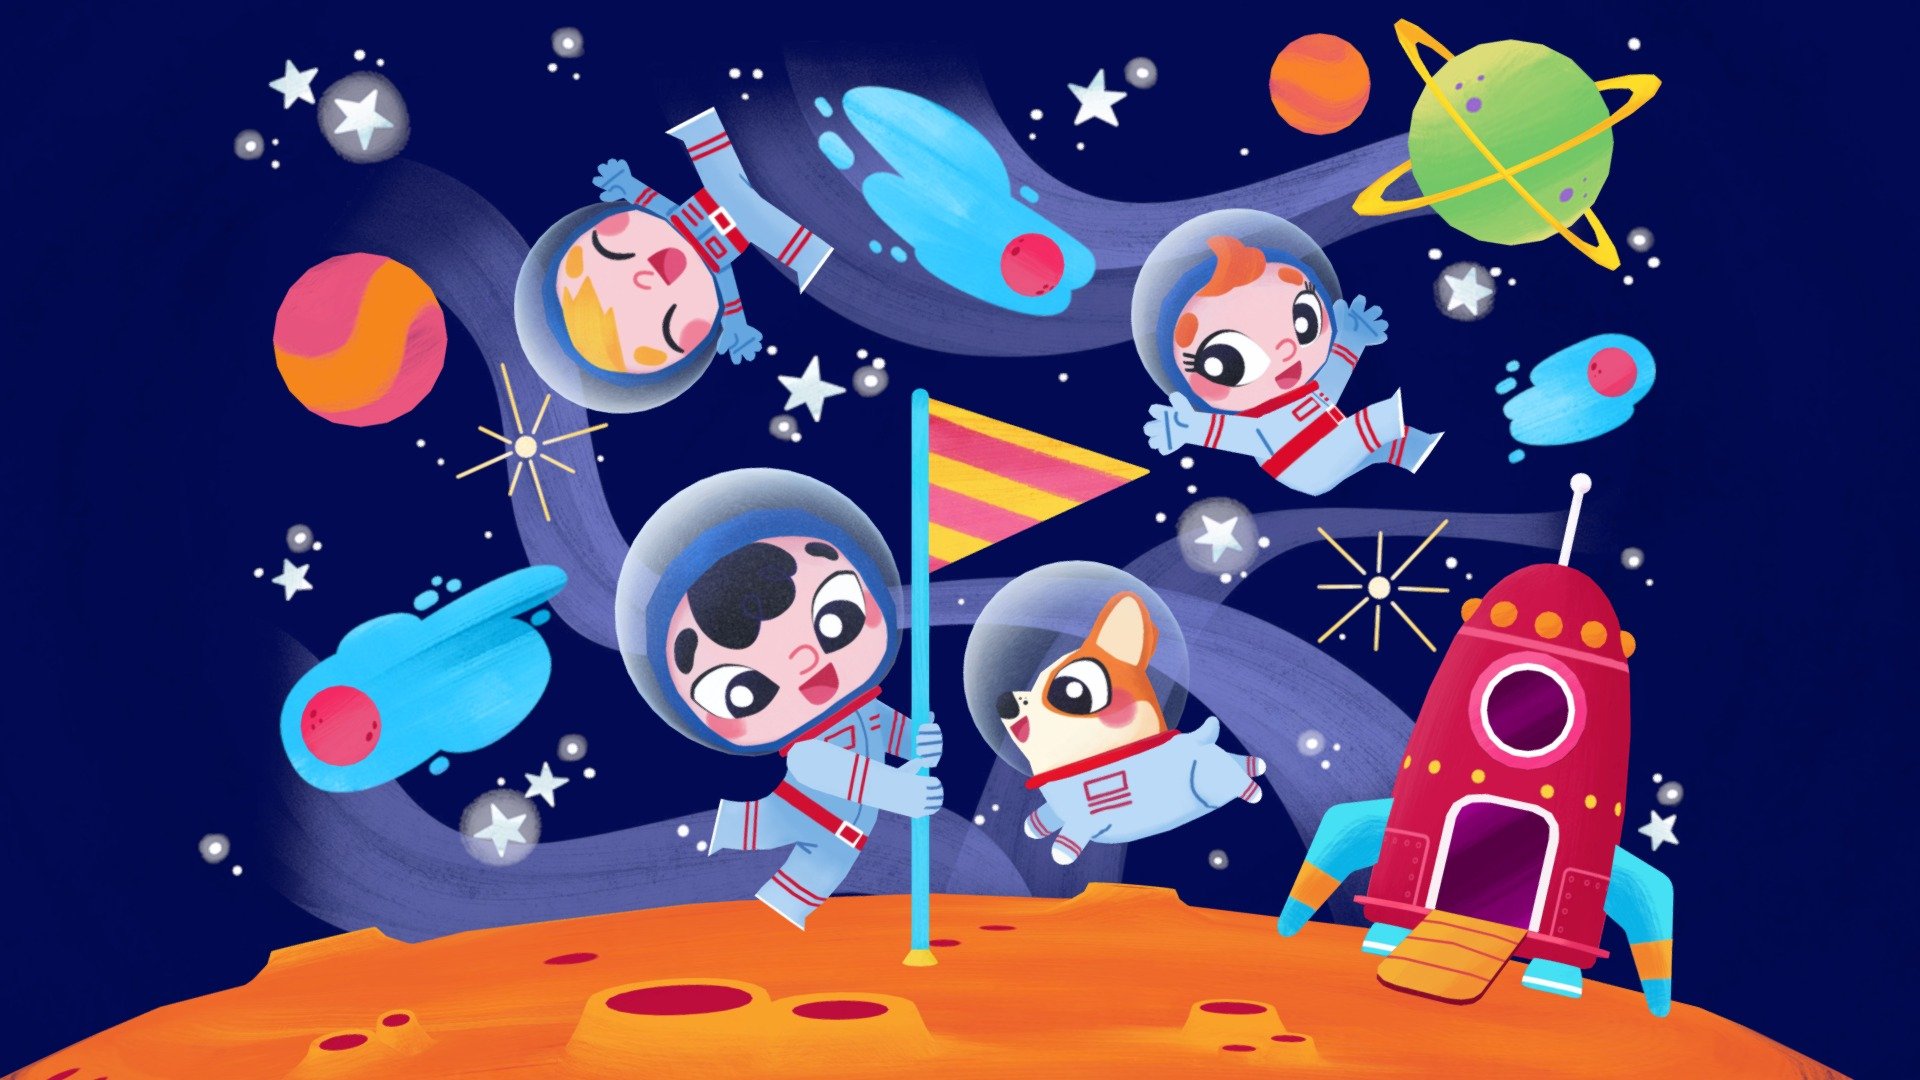 Hello! This is my entry for the #StorybookChallenge.

Since I was a kid I always dreamed of being an astronaut and I read a lot of books about space.

For this challenge I teamed up with my girlfriend, who is a professional childern's book illustrator, to recreate my desire to touch the stars. 
With this entry we wanted to pay homage to all the authors and illustrators that make all the childrens dream big with their books.

All the modelling was based on her illustration, created on Maya and then hand painted on Substance Painter by me.

This is her website if you want to check her out! - Little Spacekids' Adventure - 3D model by Lorenzo Penco (@Eksmanen) 3d model